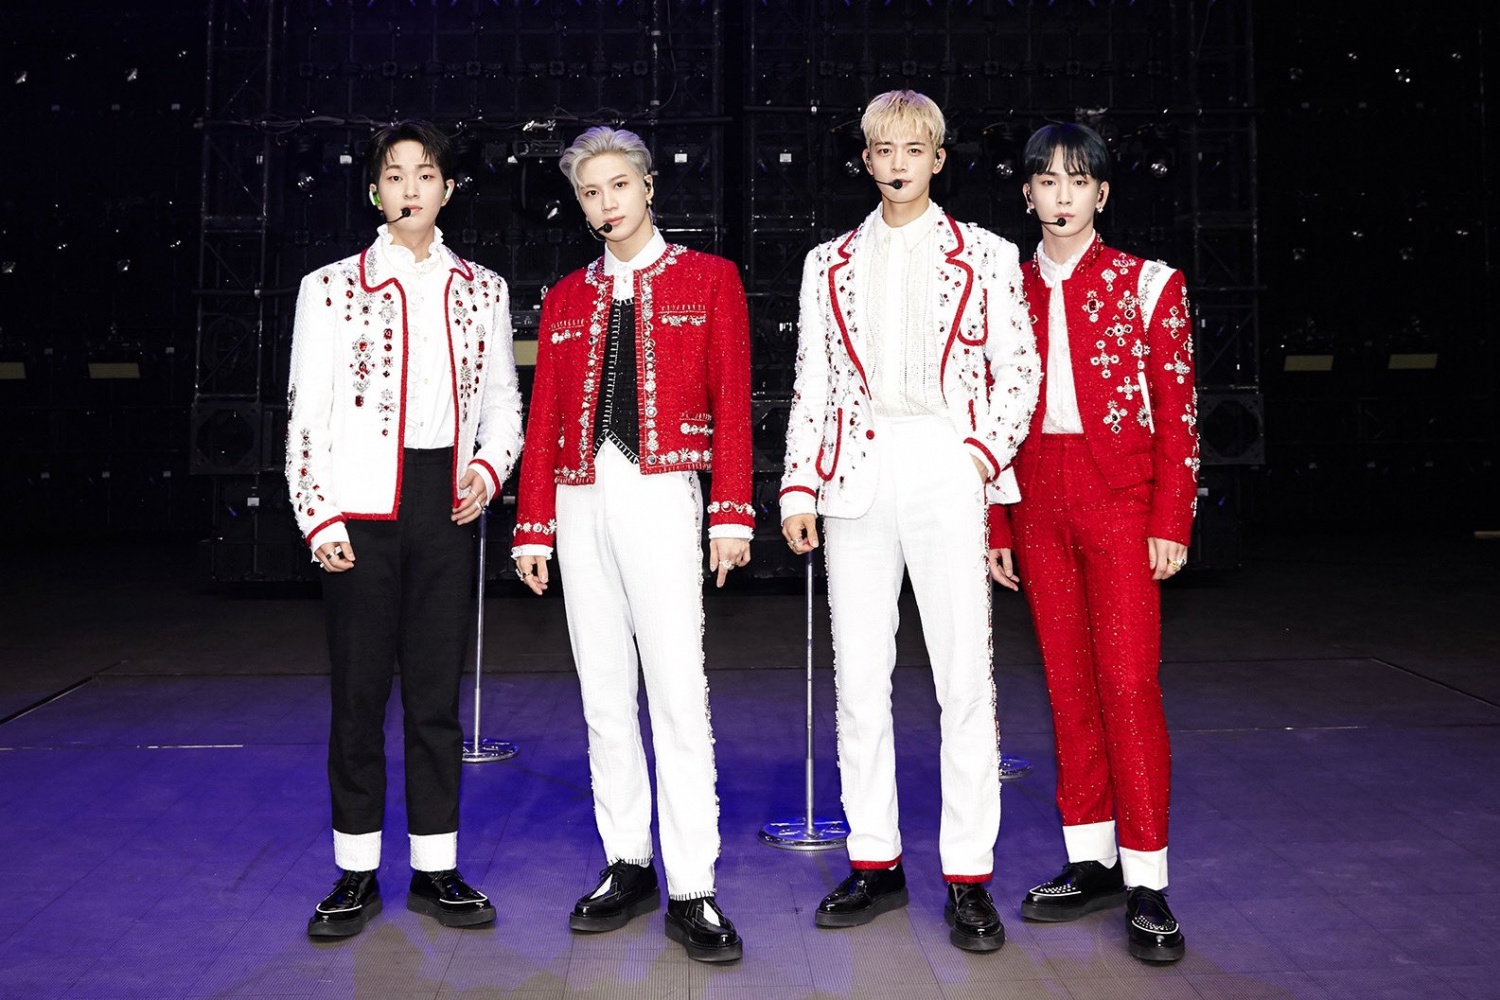 SHINee's Online Concert 'SHINee World' Wraps Up with over 100,000